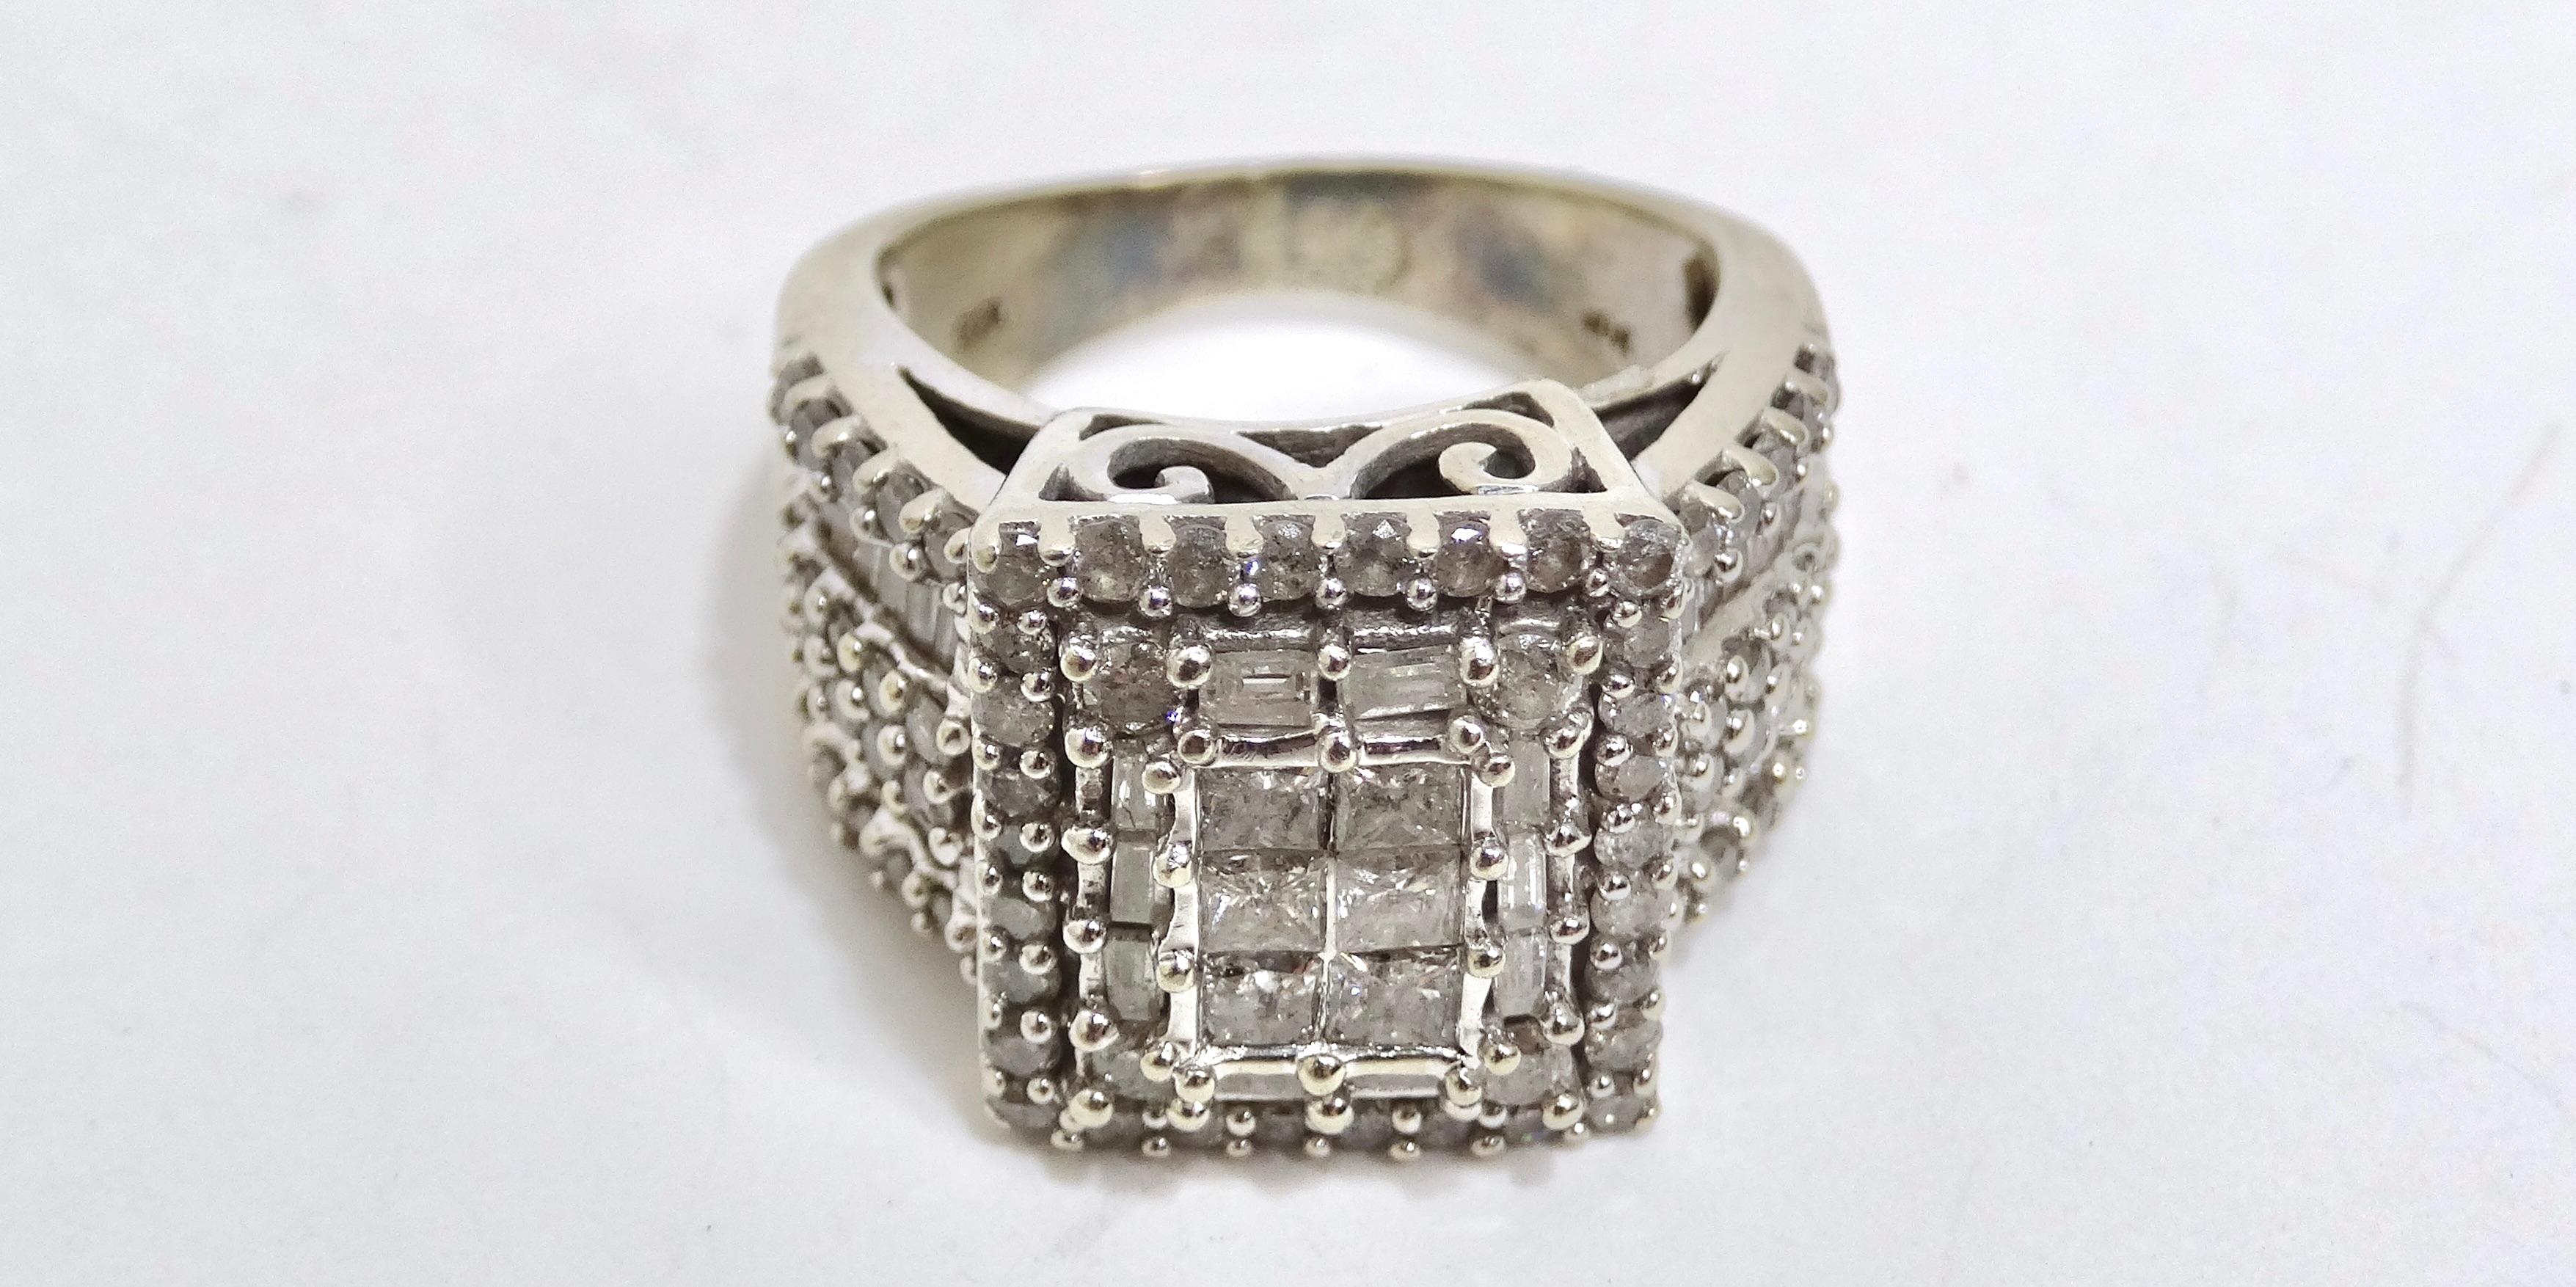 Who doesn't love sparkle? You will make a statement in this extravagant and chunky art-deco style ring from the 1930's. Art deco is a popular design that started in the 1930's and 1940's and often uses sleek geometric designs. This ring has stood